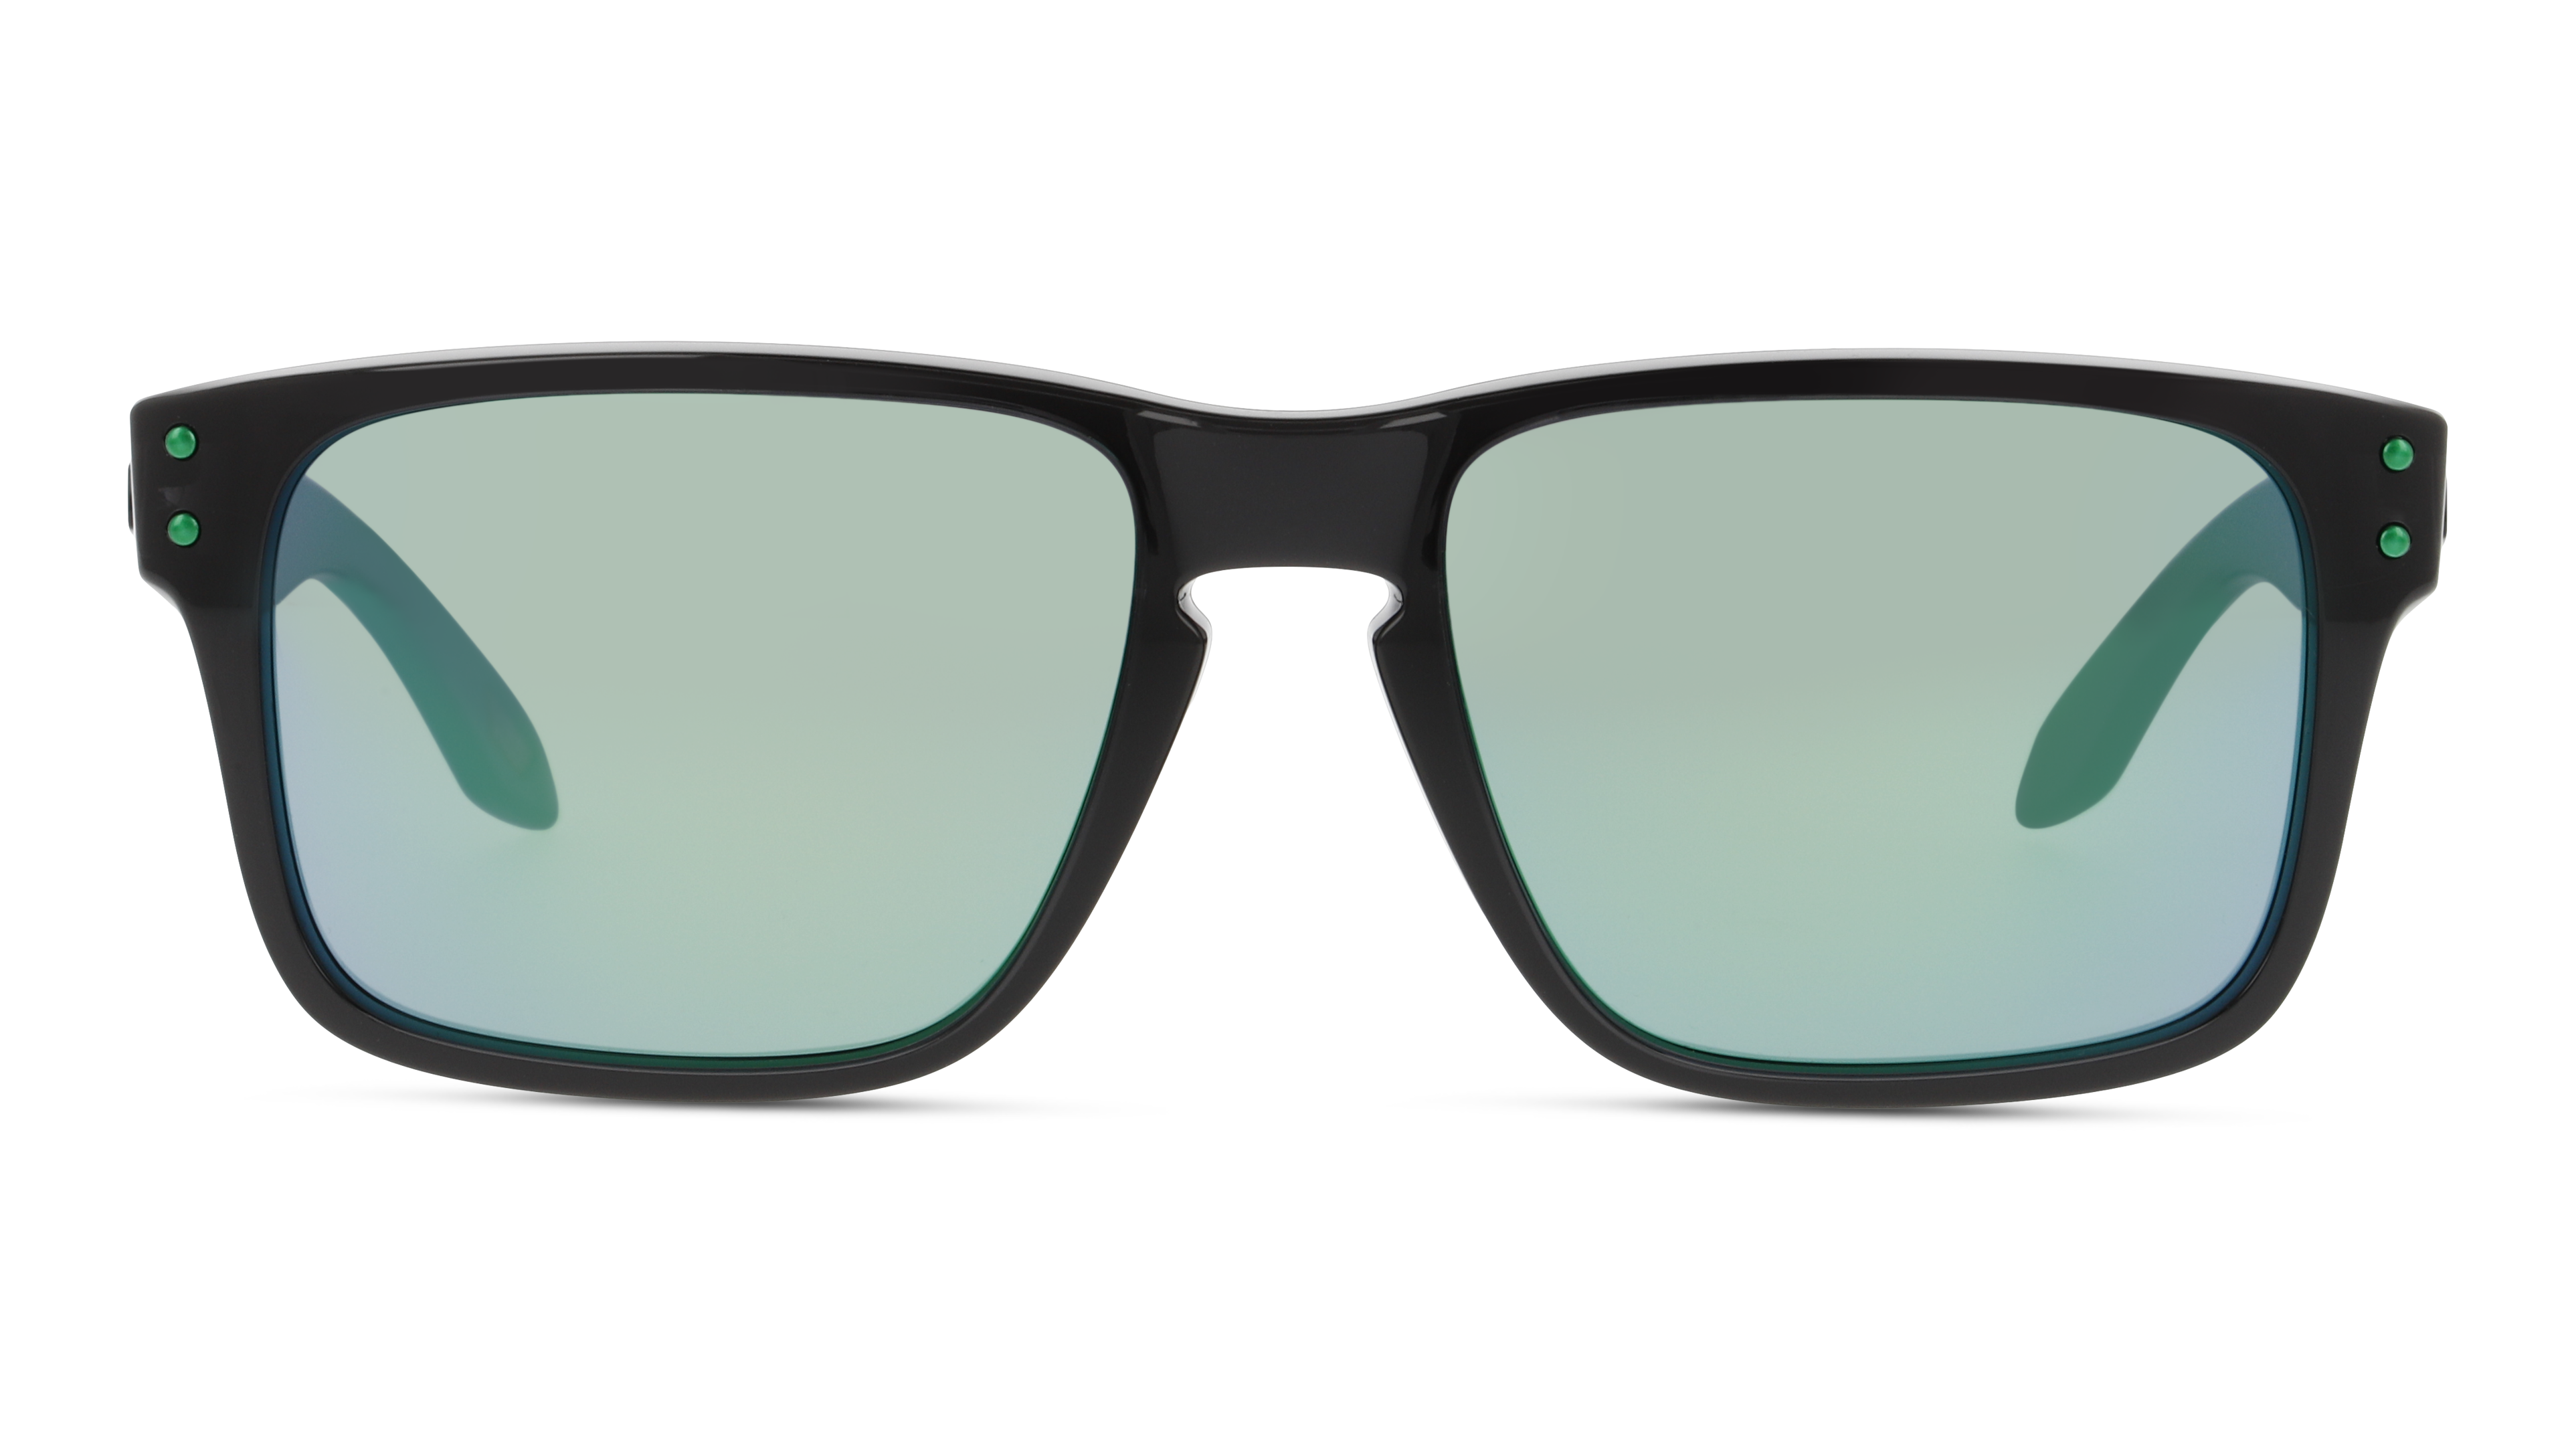 [products.image.front] OAKLEY OJ9007 900713